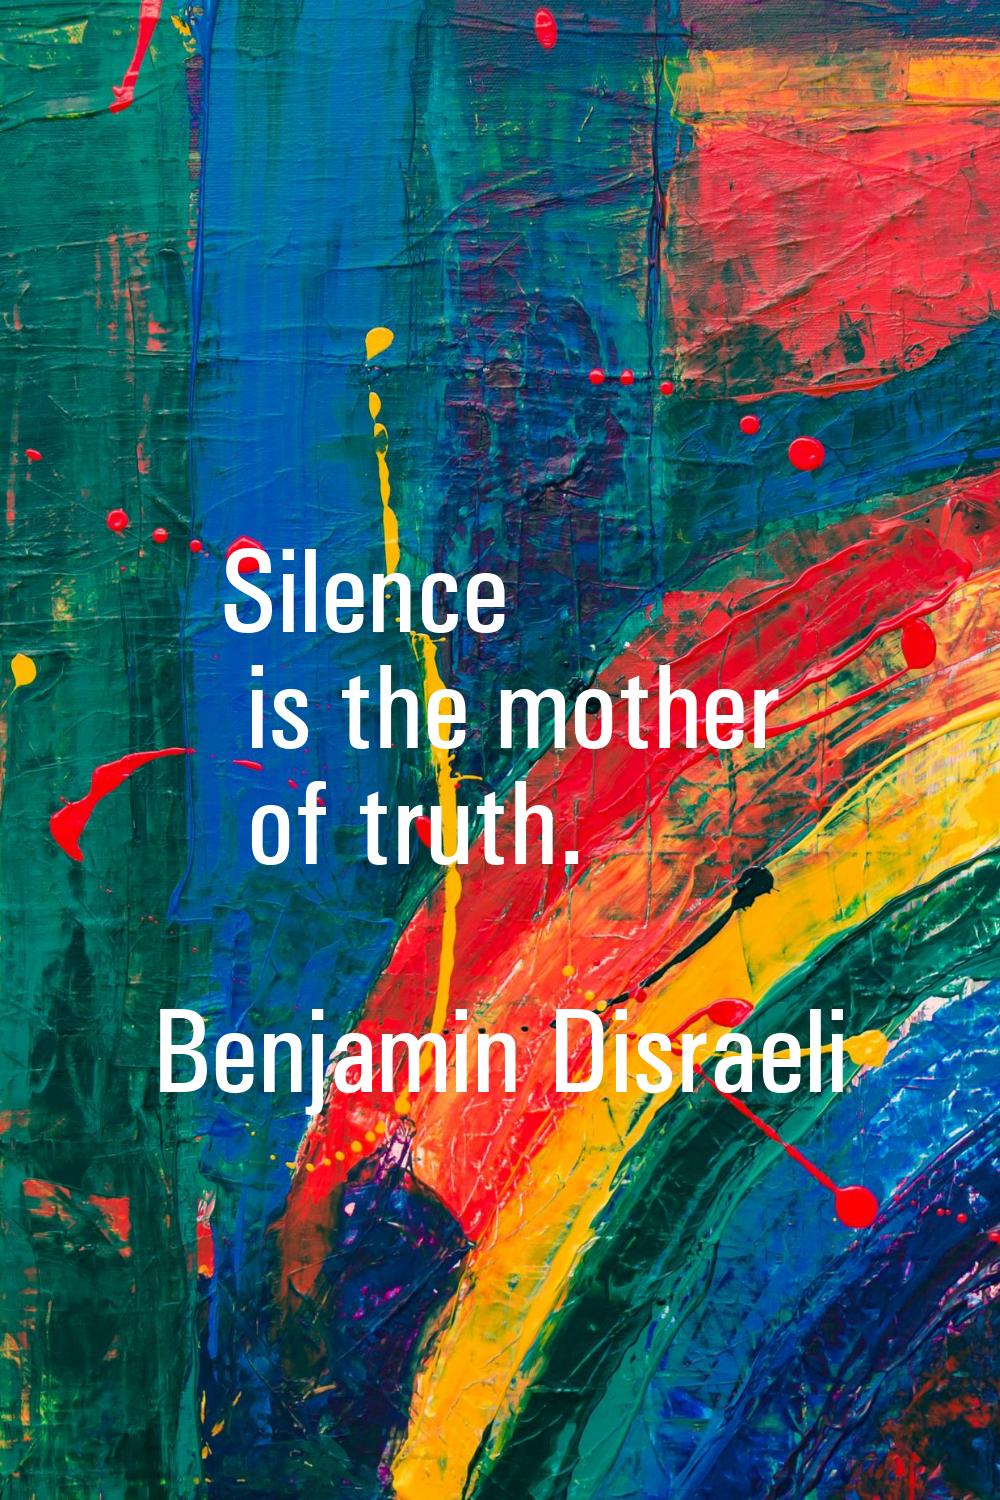 Silence is the mother of truth.